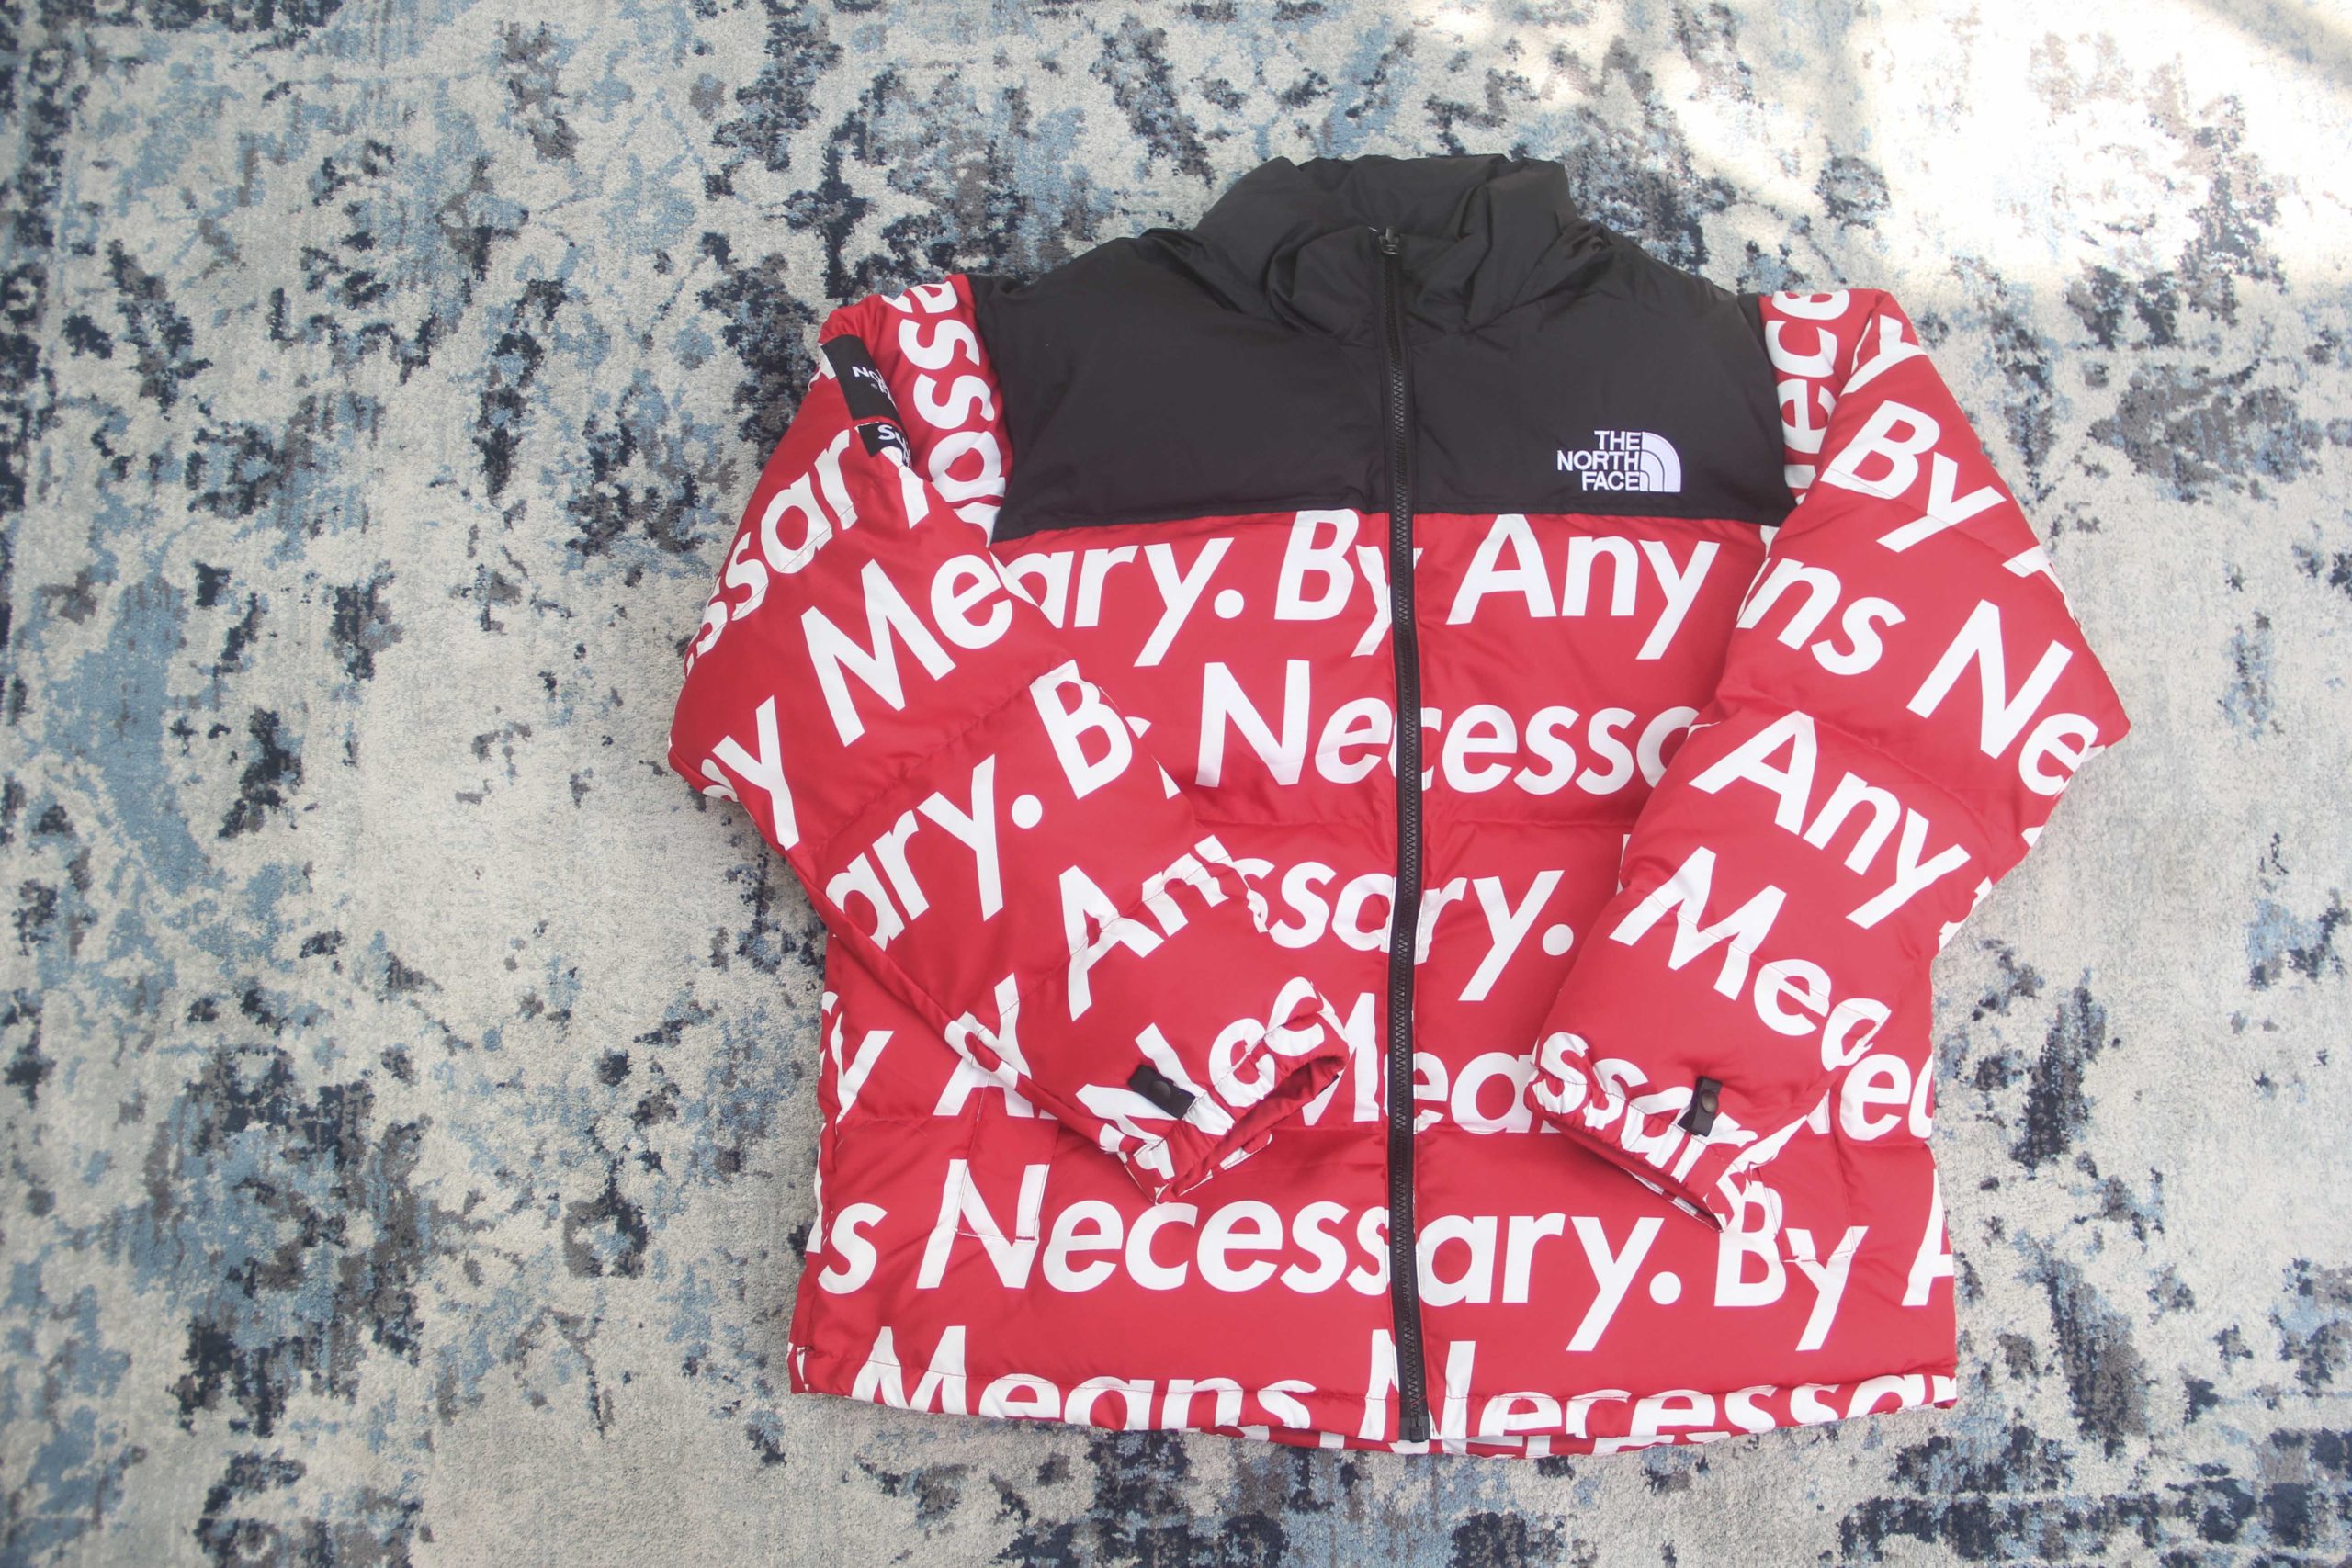 SUPREME x TNF BY ANY MEANS NECESSARY NUPTSE DOWN JACKET 15FW